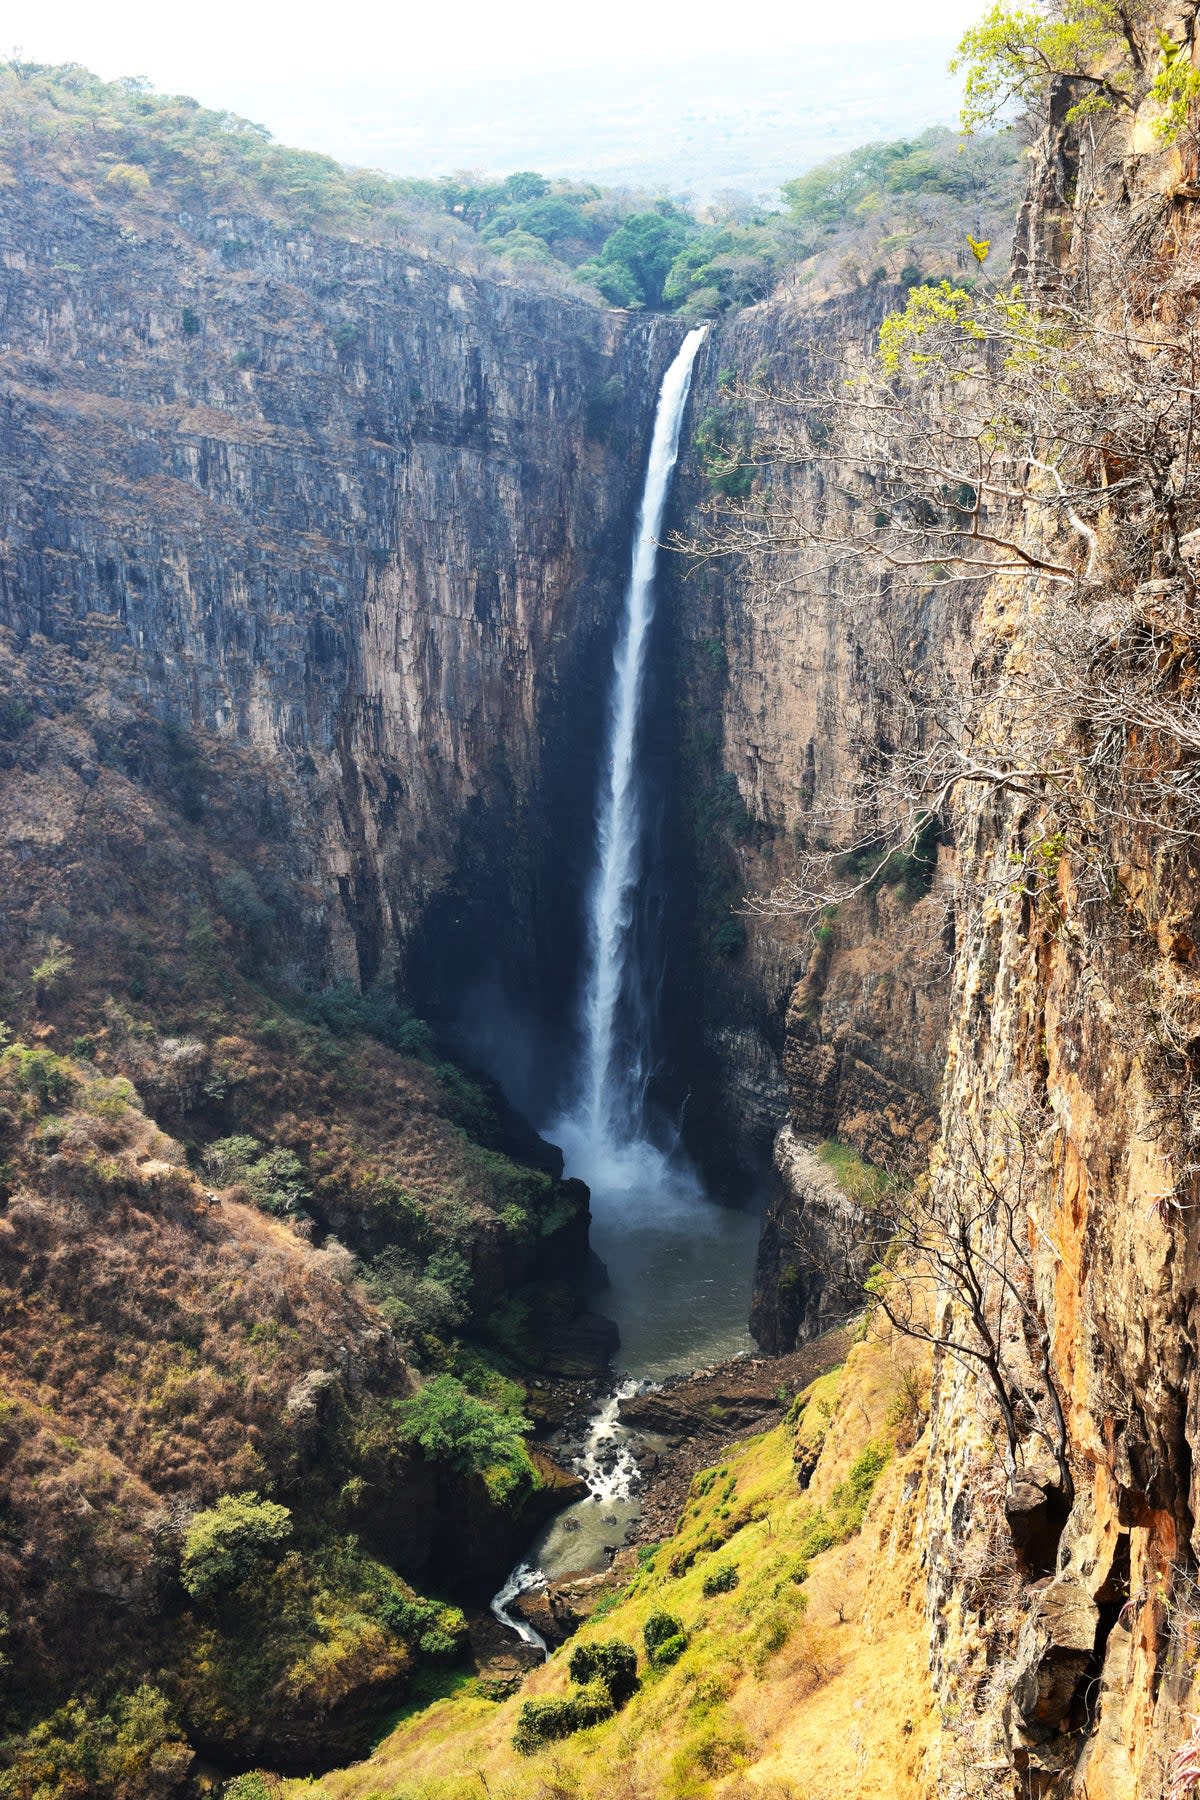 The 235-metre high Kalambo Falls on the Zambia/Tanzania border were part of a remarkable area of prehistoric activity (Deep Roots of Humanity research project and University of Liverpool)